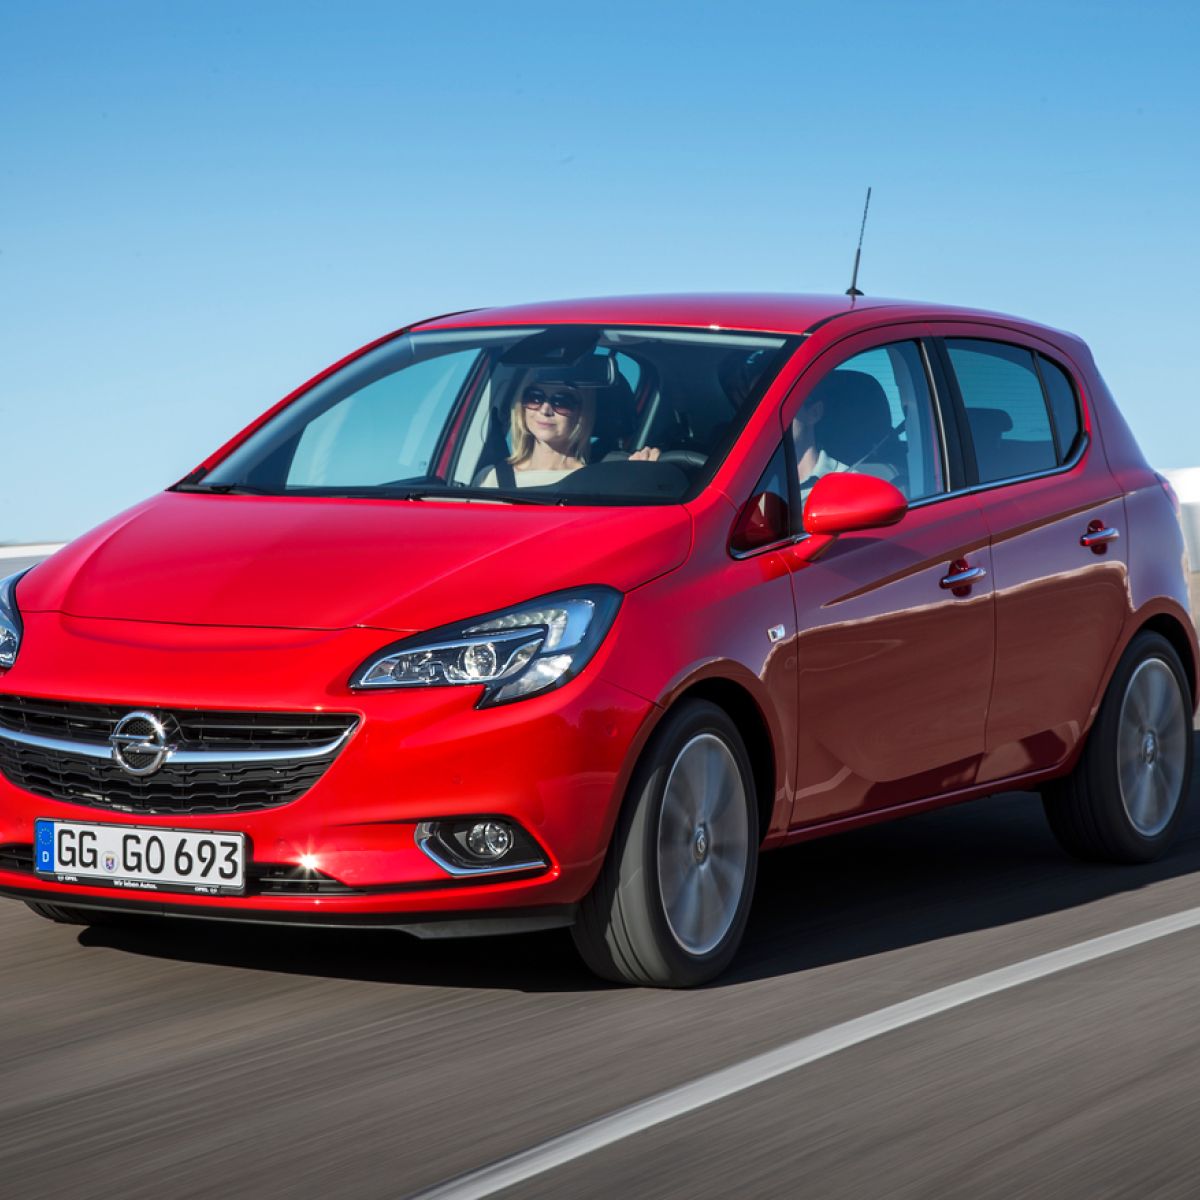 Verbinding matras Negende First Drive: New Opel Corsa steers in right direction